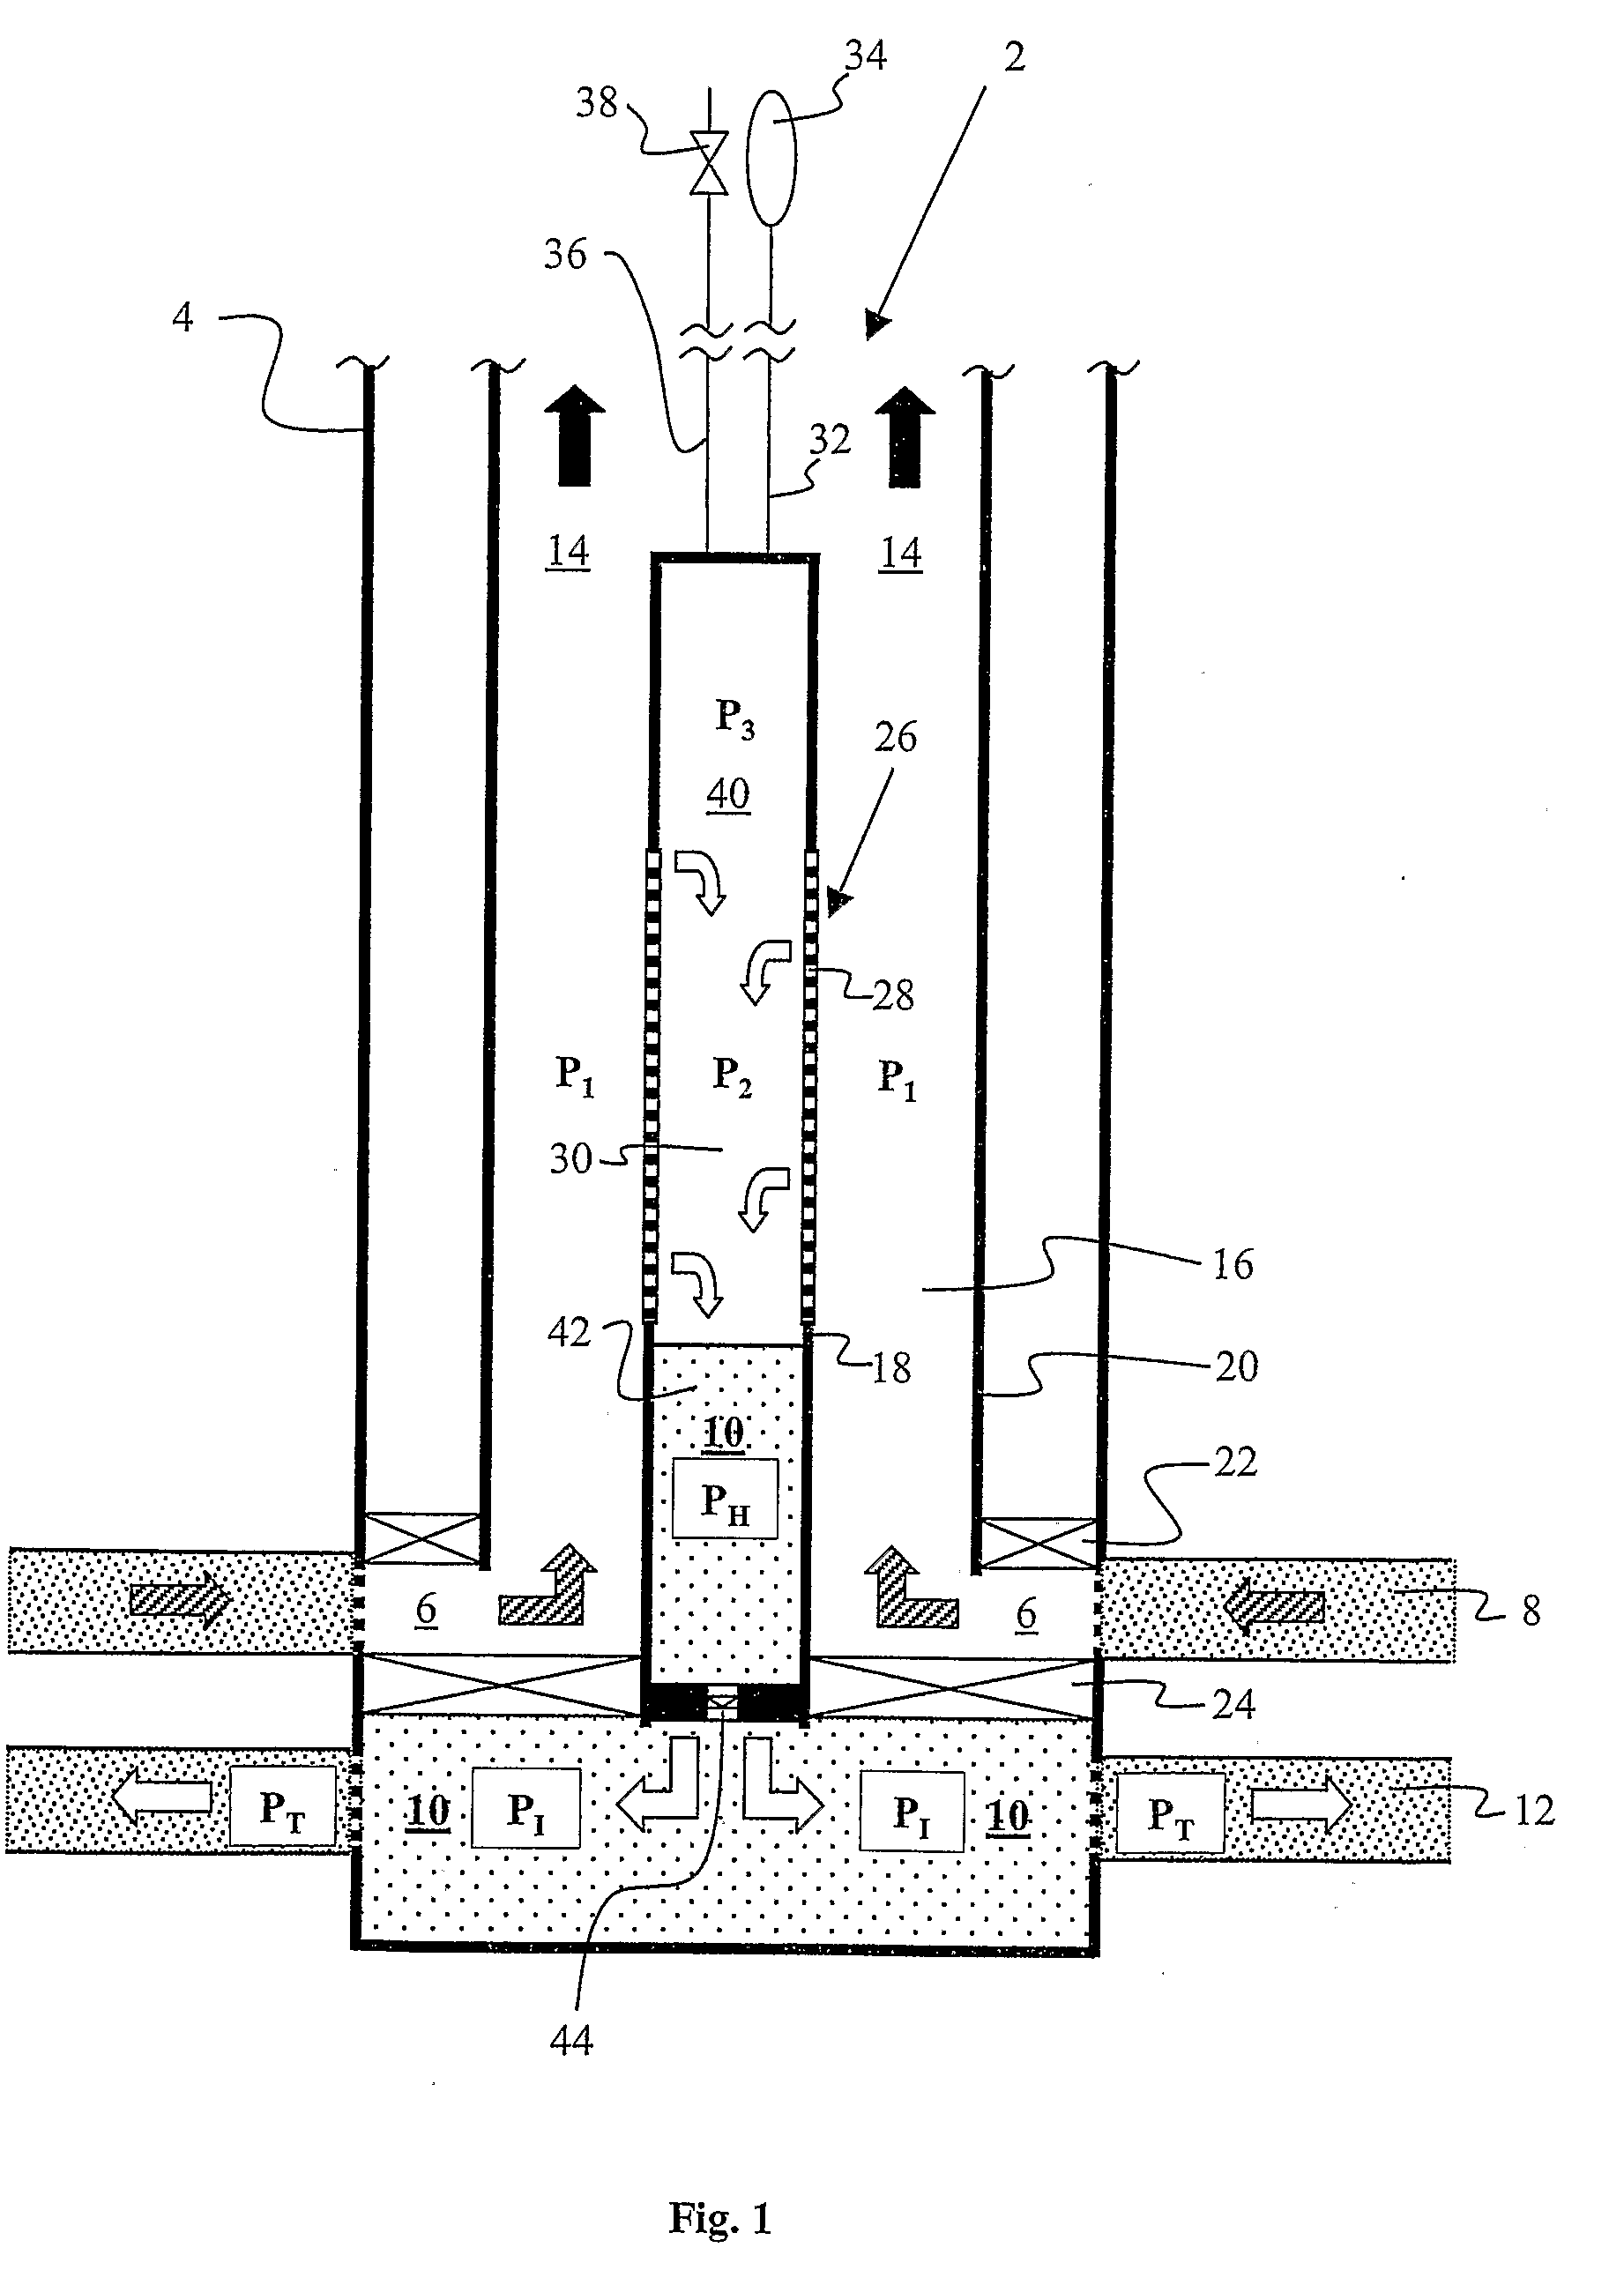 Method and an Apparatus for Separation and Injection of Water from a Water- and Hydrocarbon-Containing Outflow Down in a Production Well